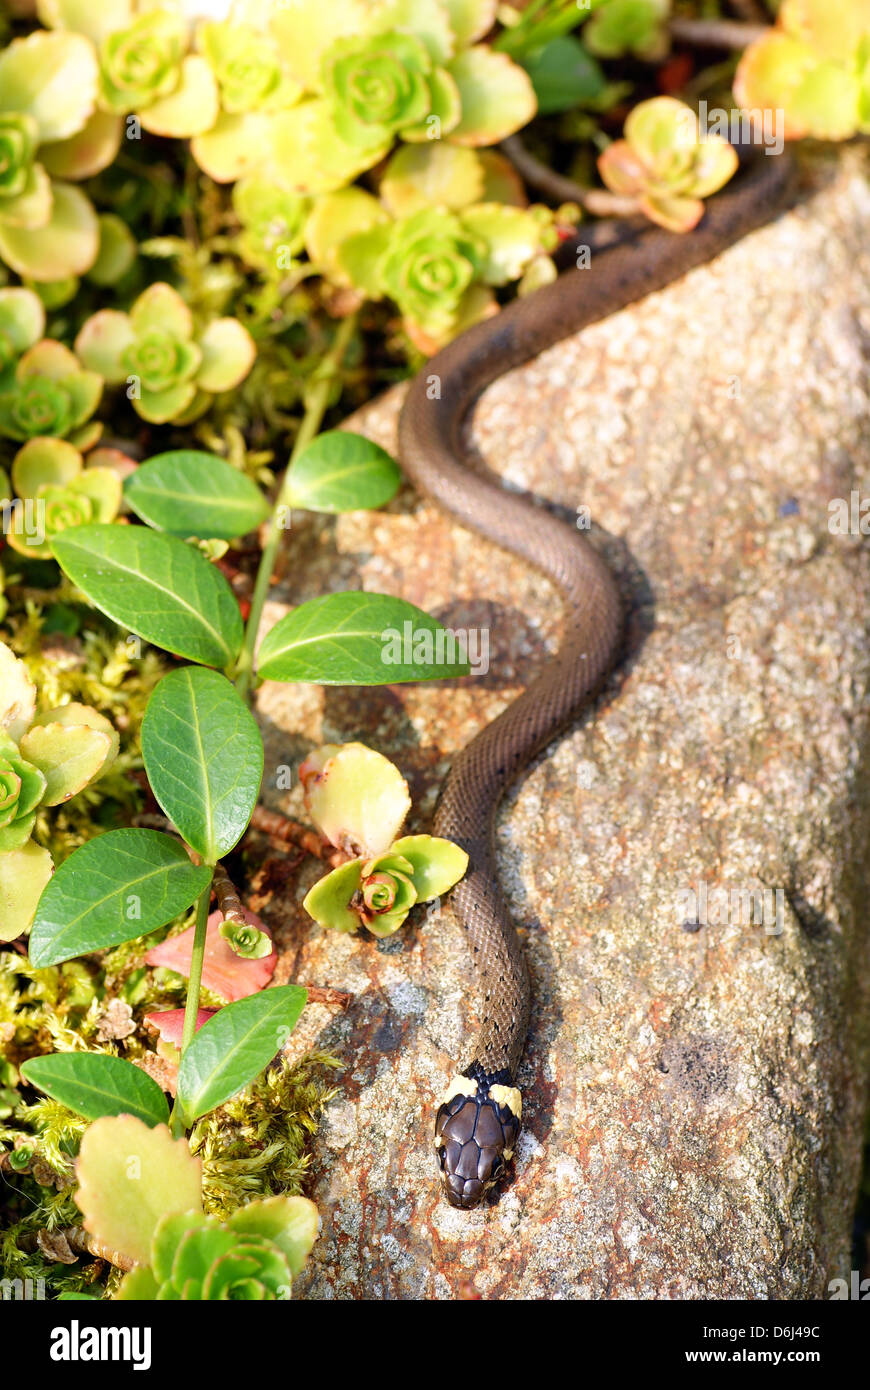 small grass snake lie on stone Stock Photo